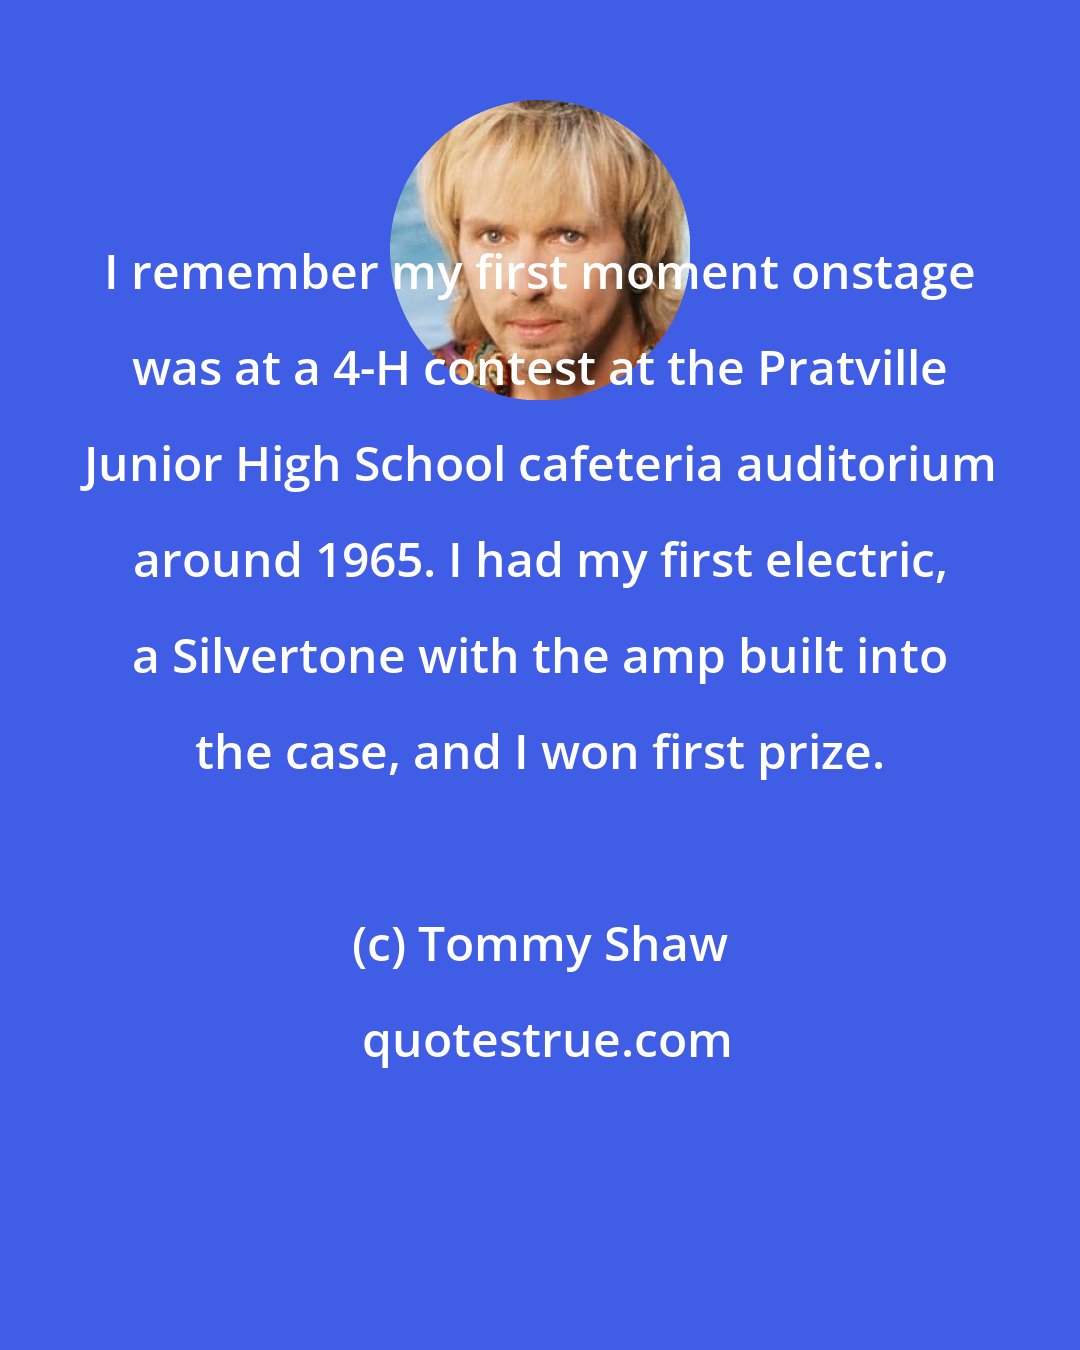 Tommy Shaw: I remember my first moment onstage was at a 4-H contest at the Pratville Junior High School cafeteria auditorium around 1965. I had my first electric, a Silvertone with the amp built into the case, and I won first prize.